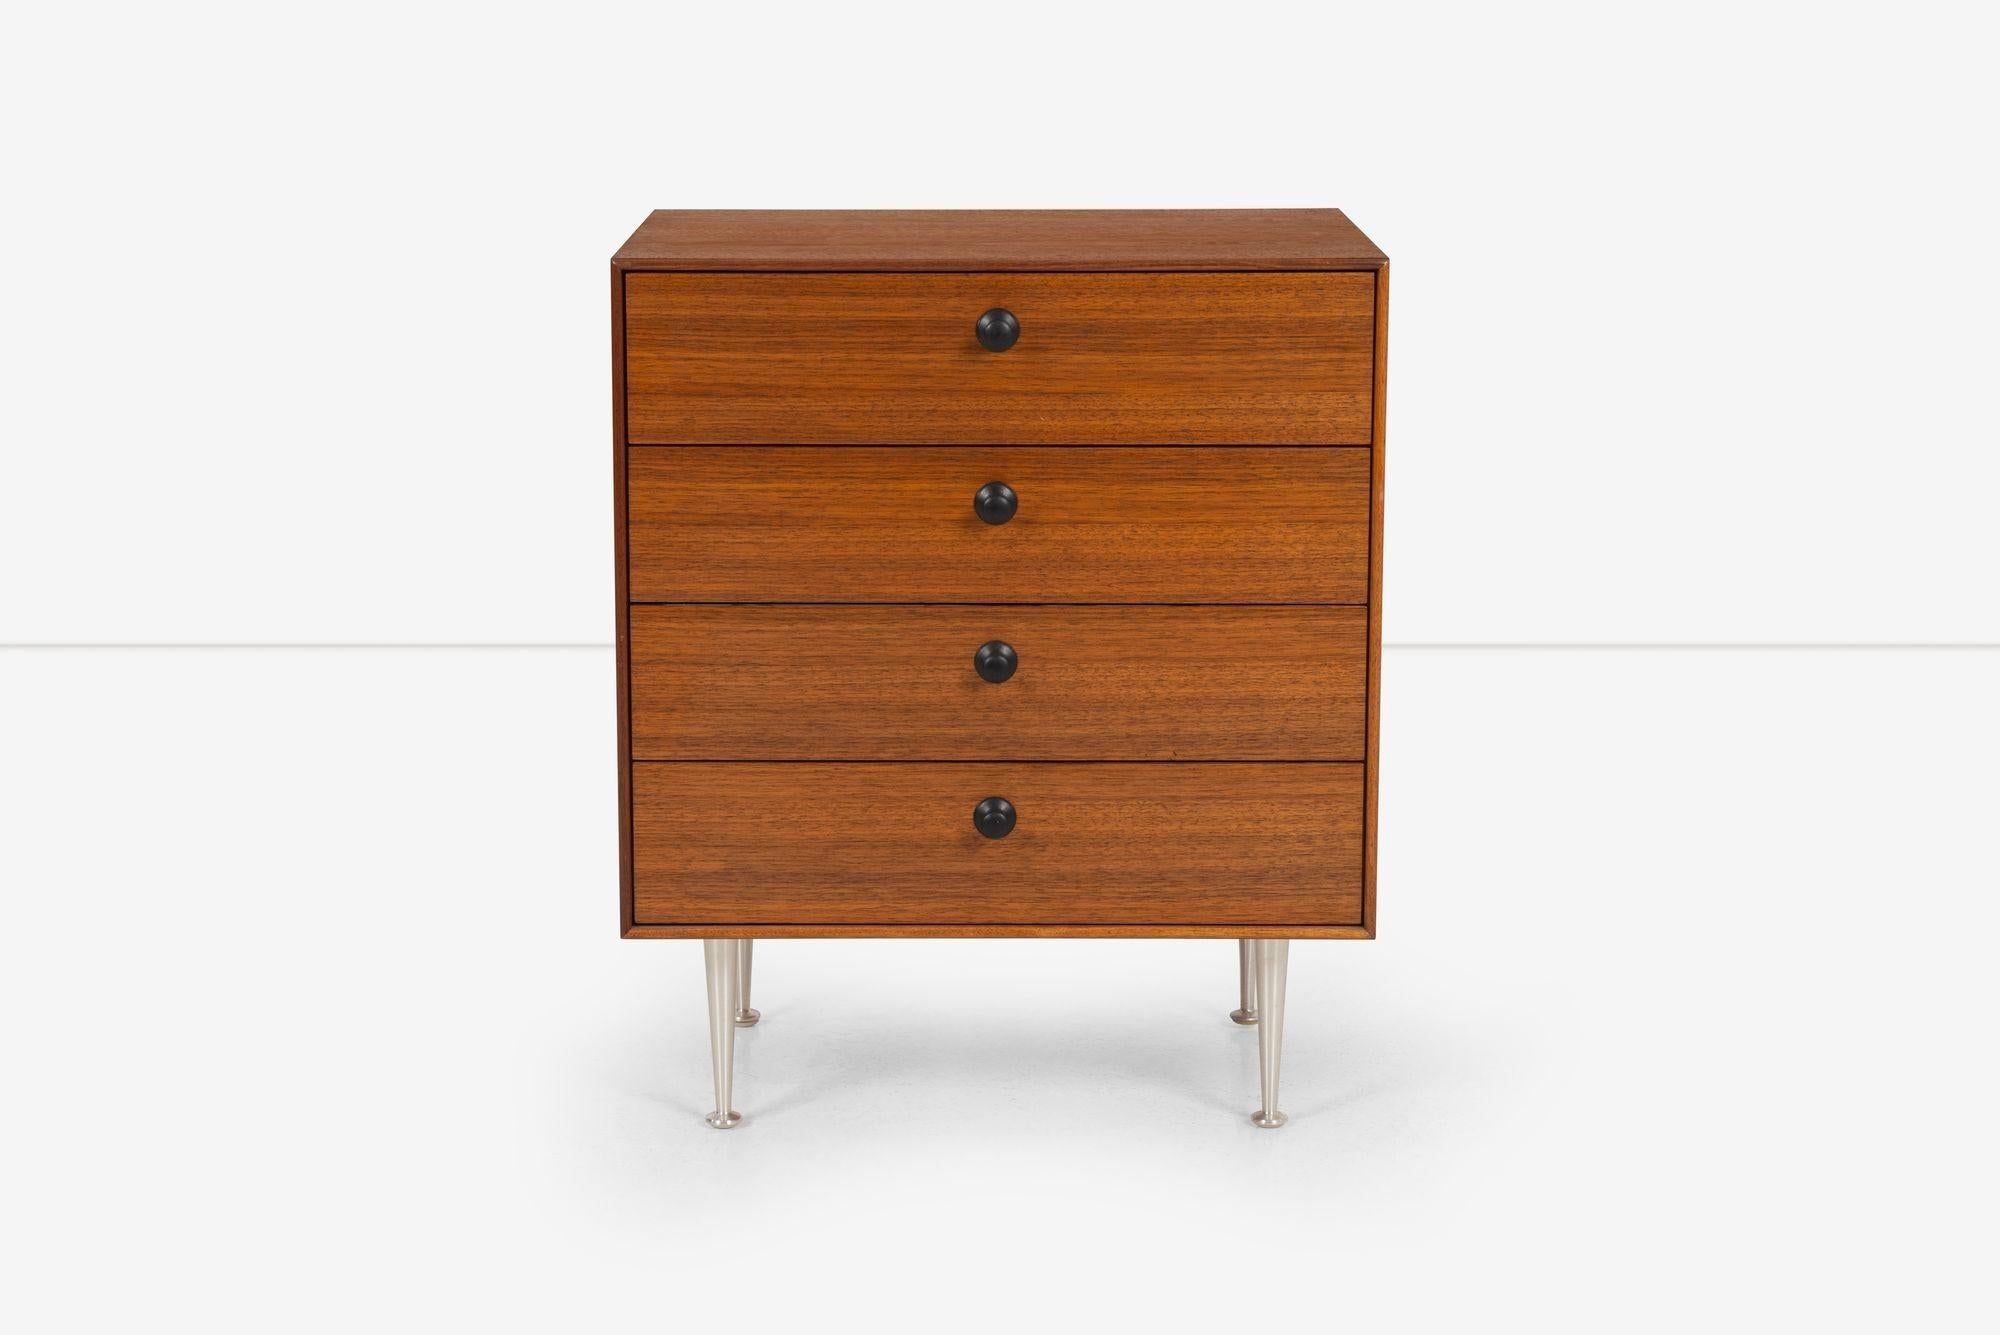 George Nelson for Herman Miller 4-Drawer Thin Edge Cabinet with Rare Pulls, oiled walnut with Tapered 7